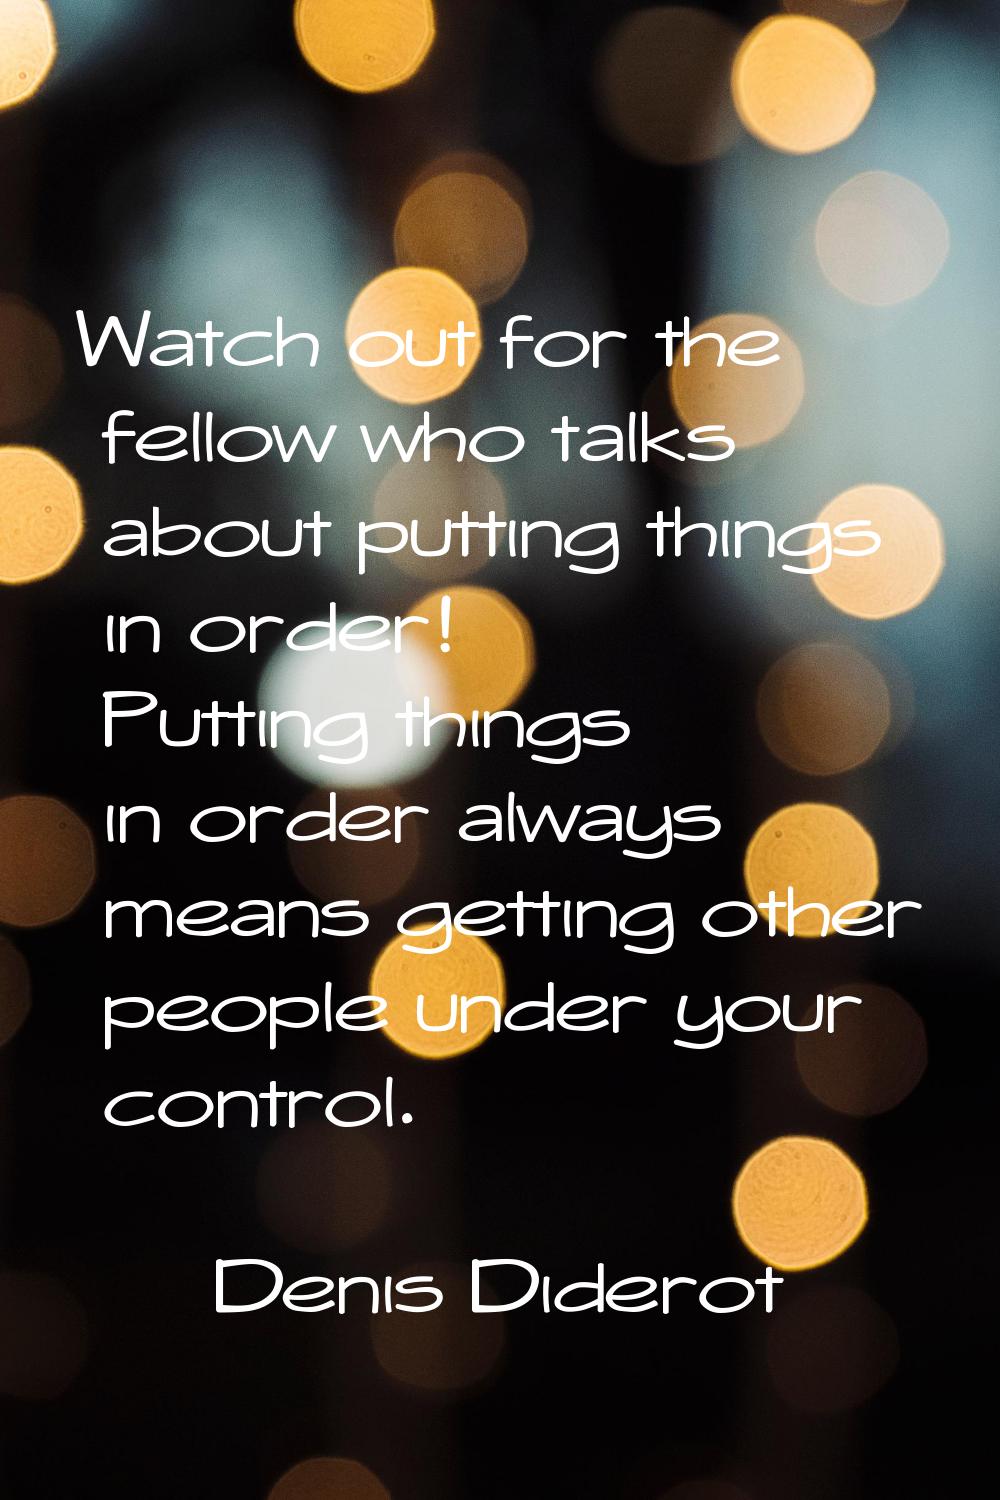 Watch out for the fellow who talks about putting things in order! Putting things in order always me